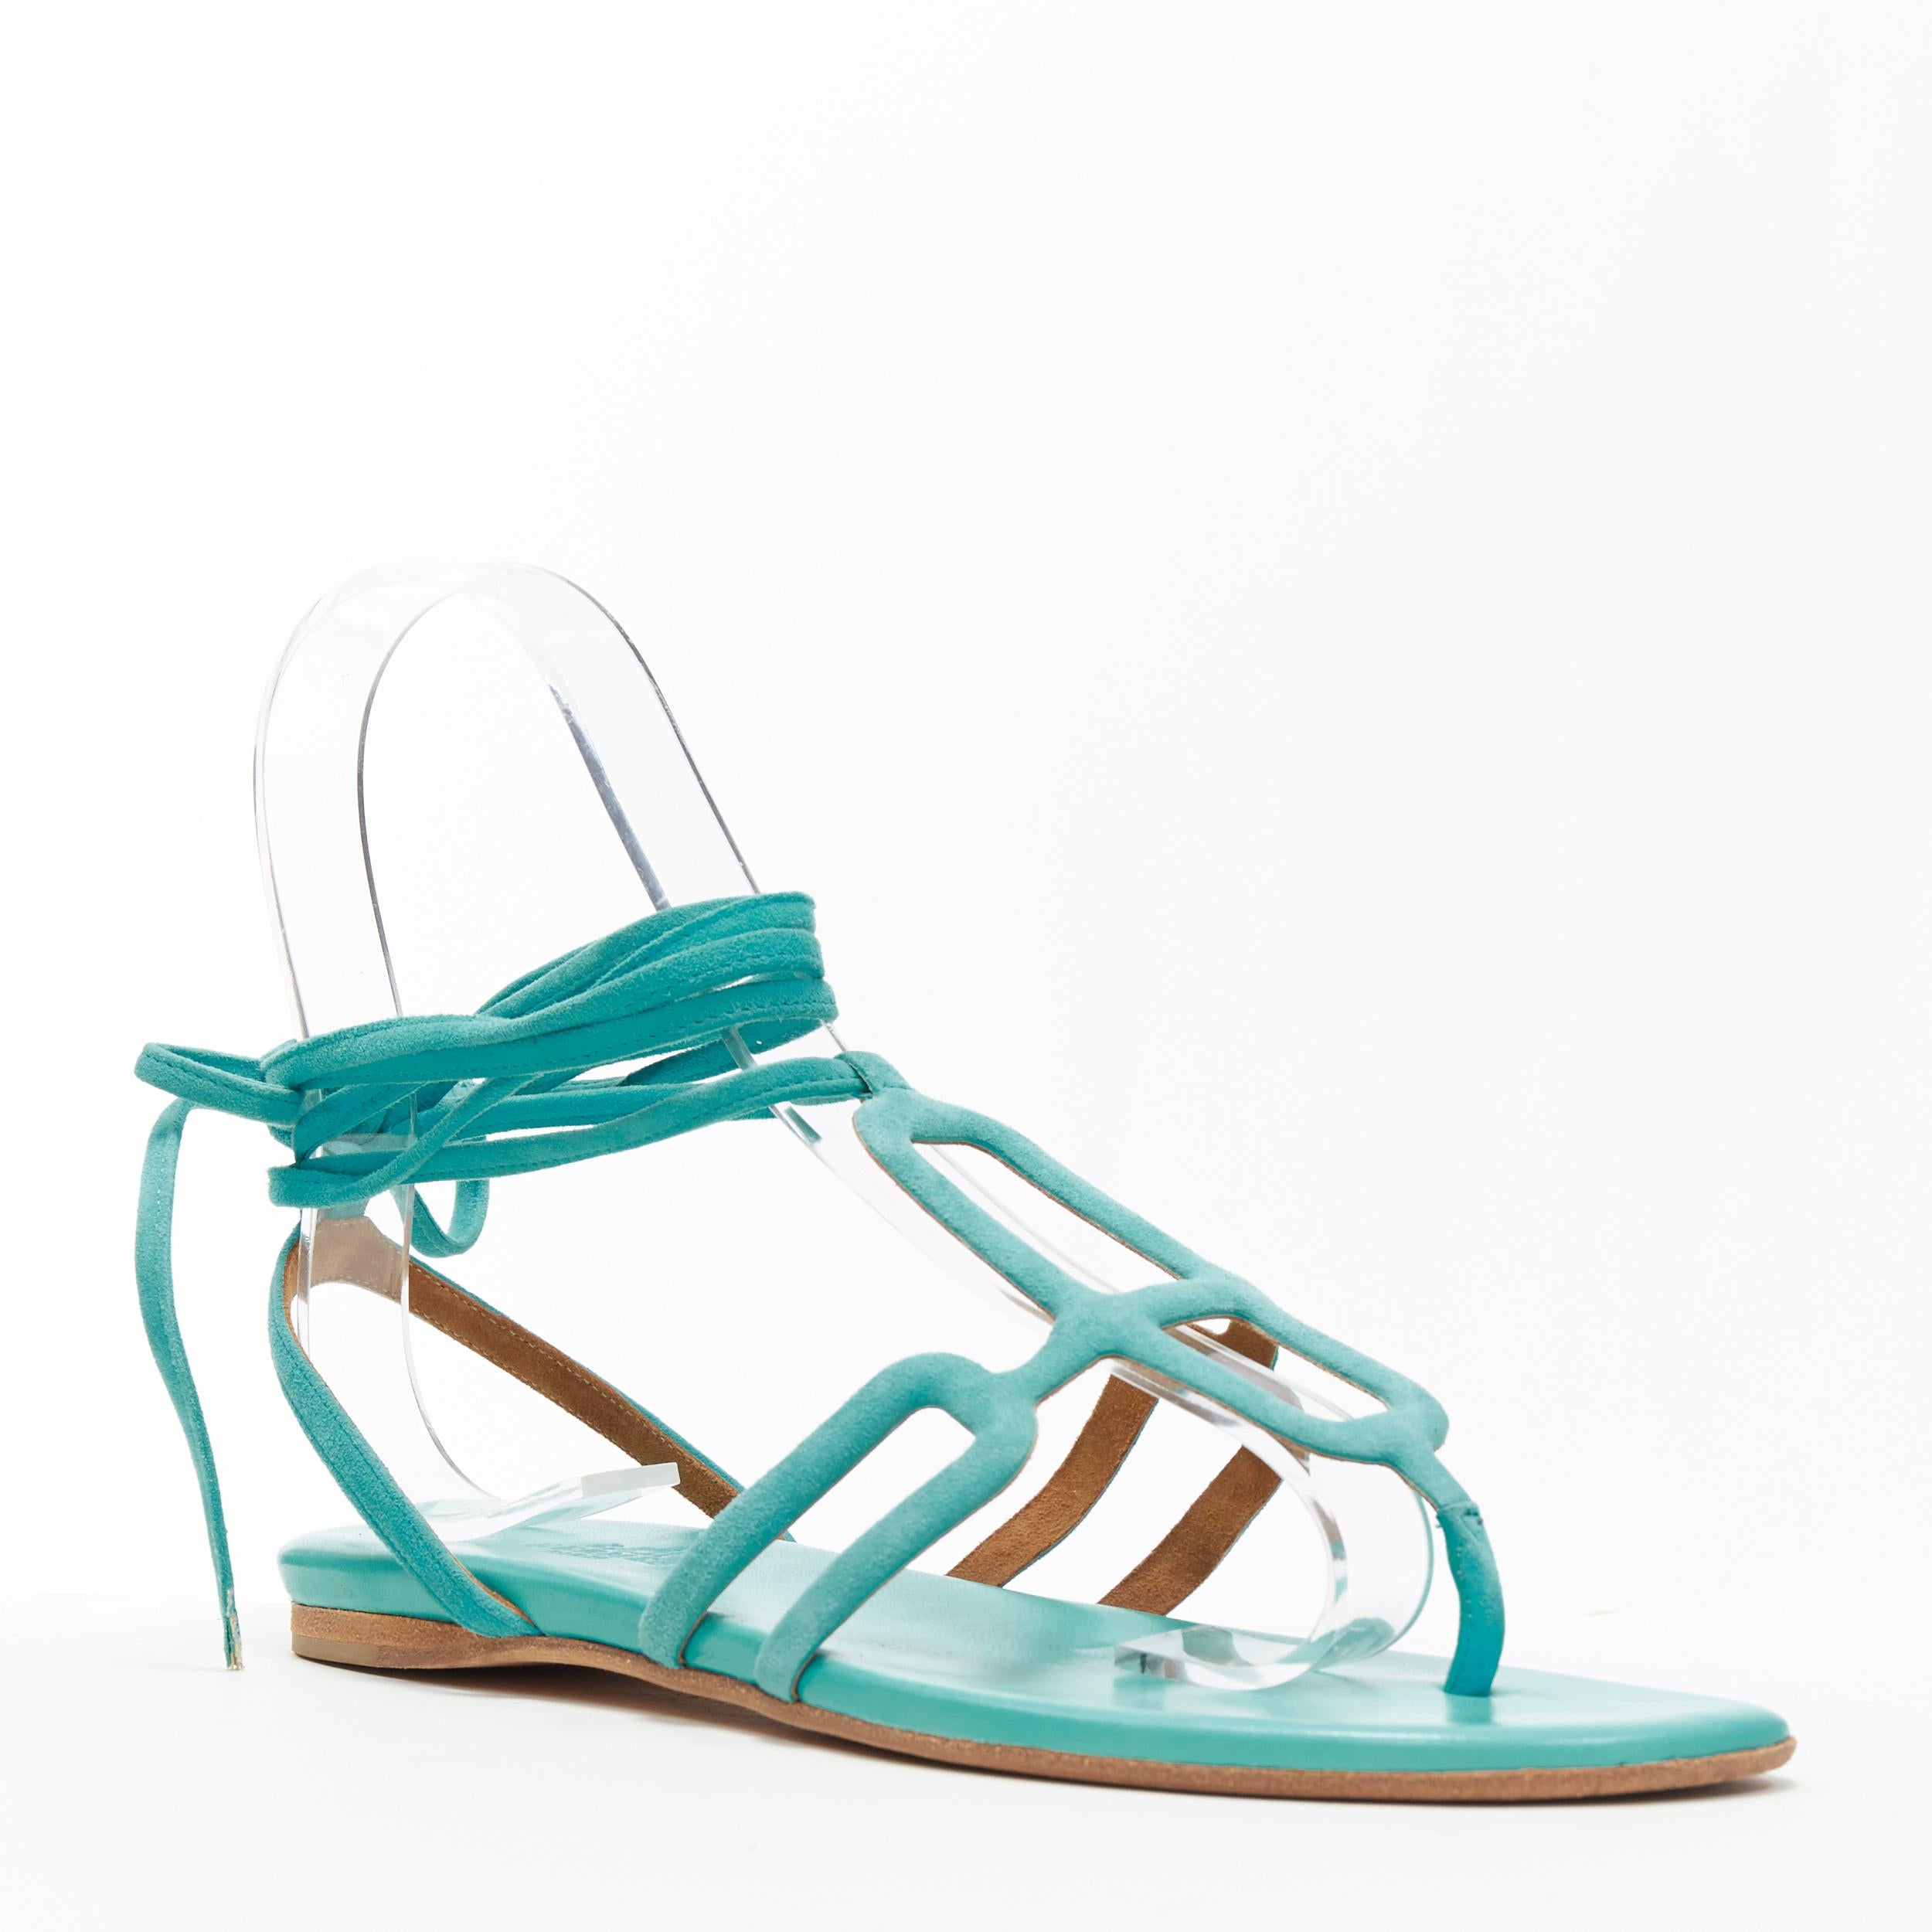 HERMES teal blue suede geometric buckle ankle wrap thong flat sandals EU35.5
Brand: Hermes
Model Name / Style: Suede sandals
Material: Suede
Color: Blue
Pattern: Solid
Closure: Ankle strap
Extra Detail: Buckle design. Thong sandals Flat (Under 1 in)